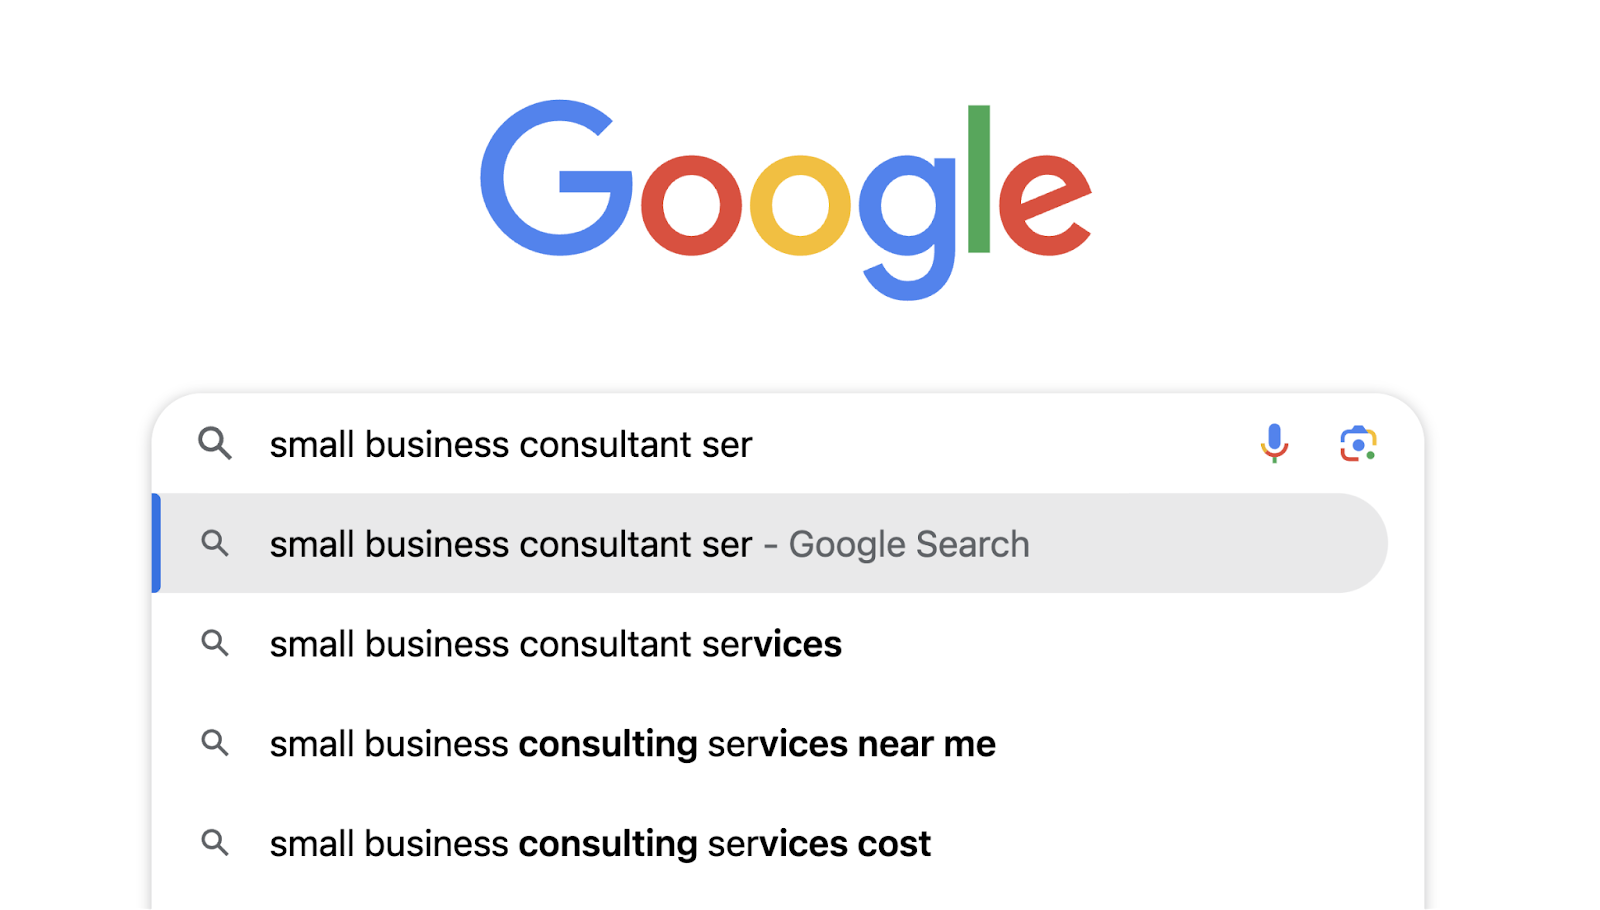 google autocompletes small business consultant to services, services near me, and services cost